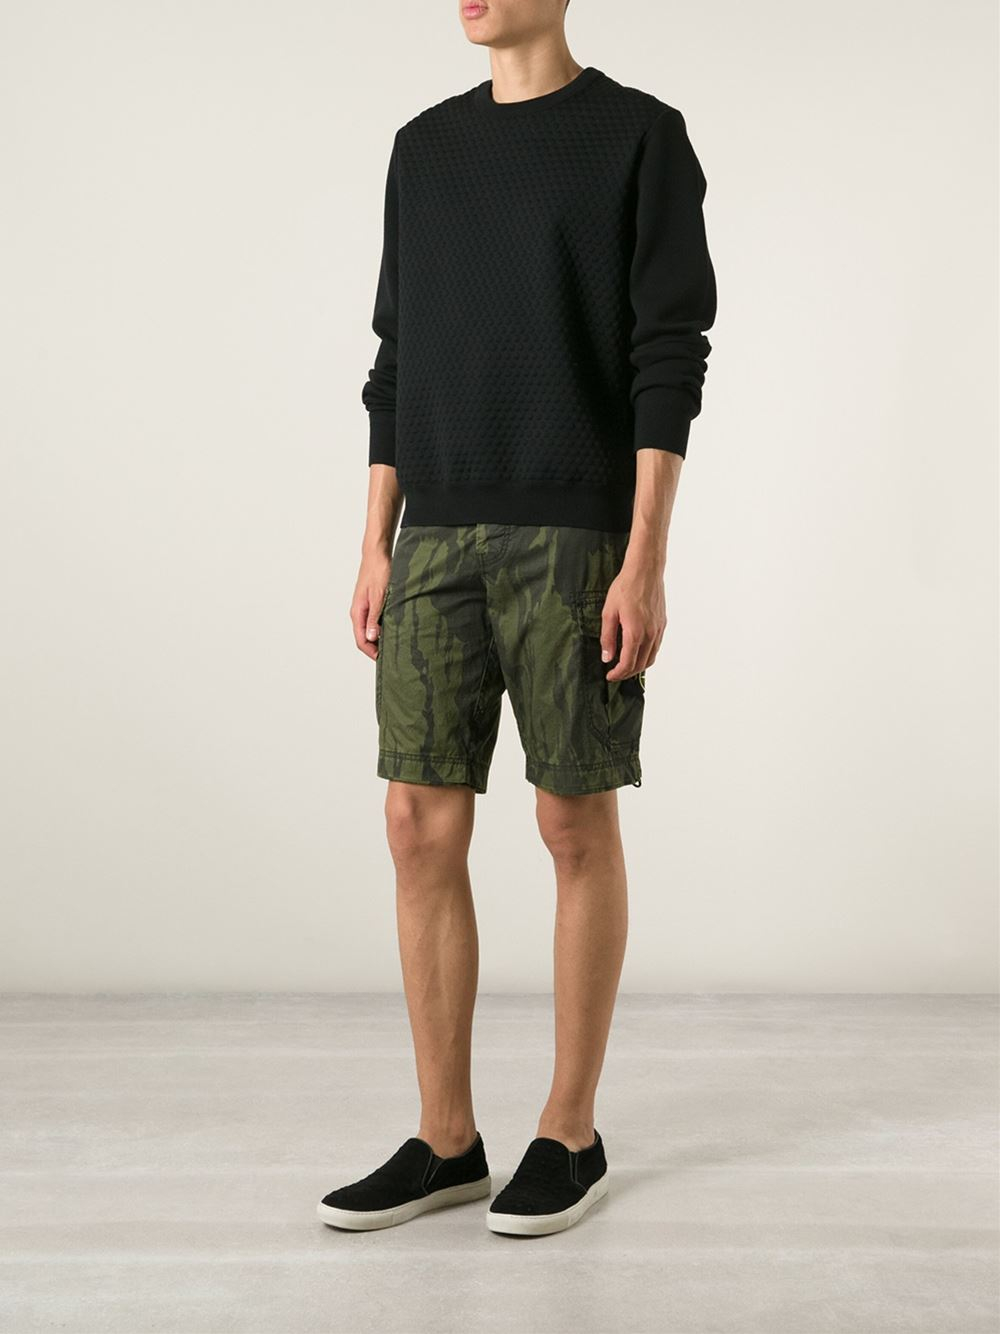 Stone island Camouflage Cargo Shorts in Green for Men | Lyst